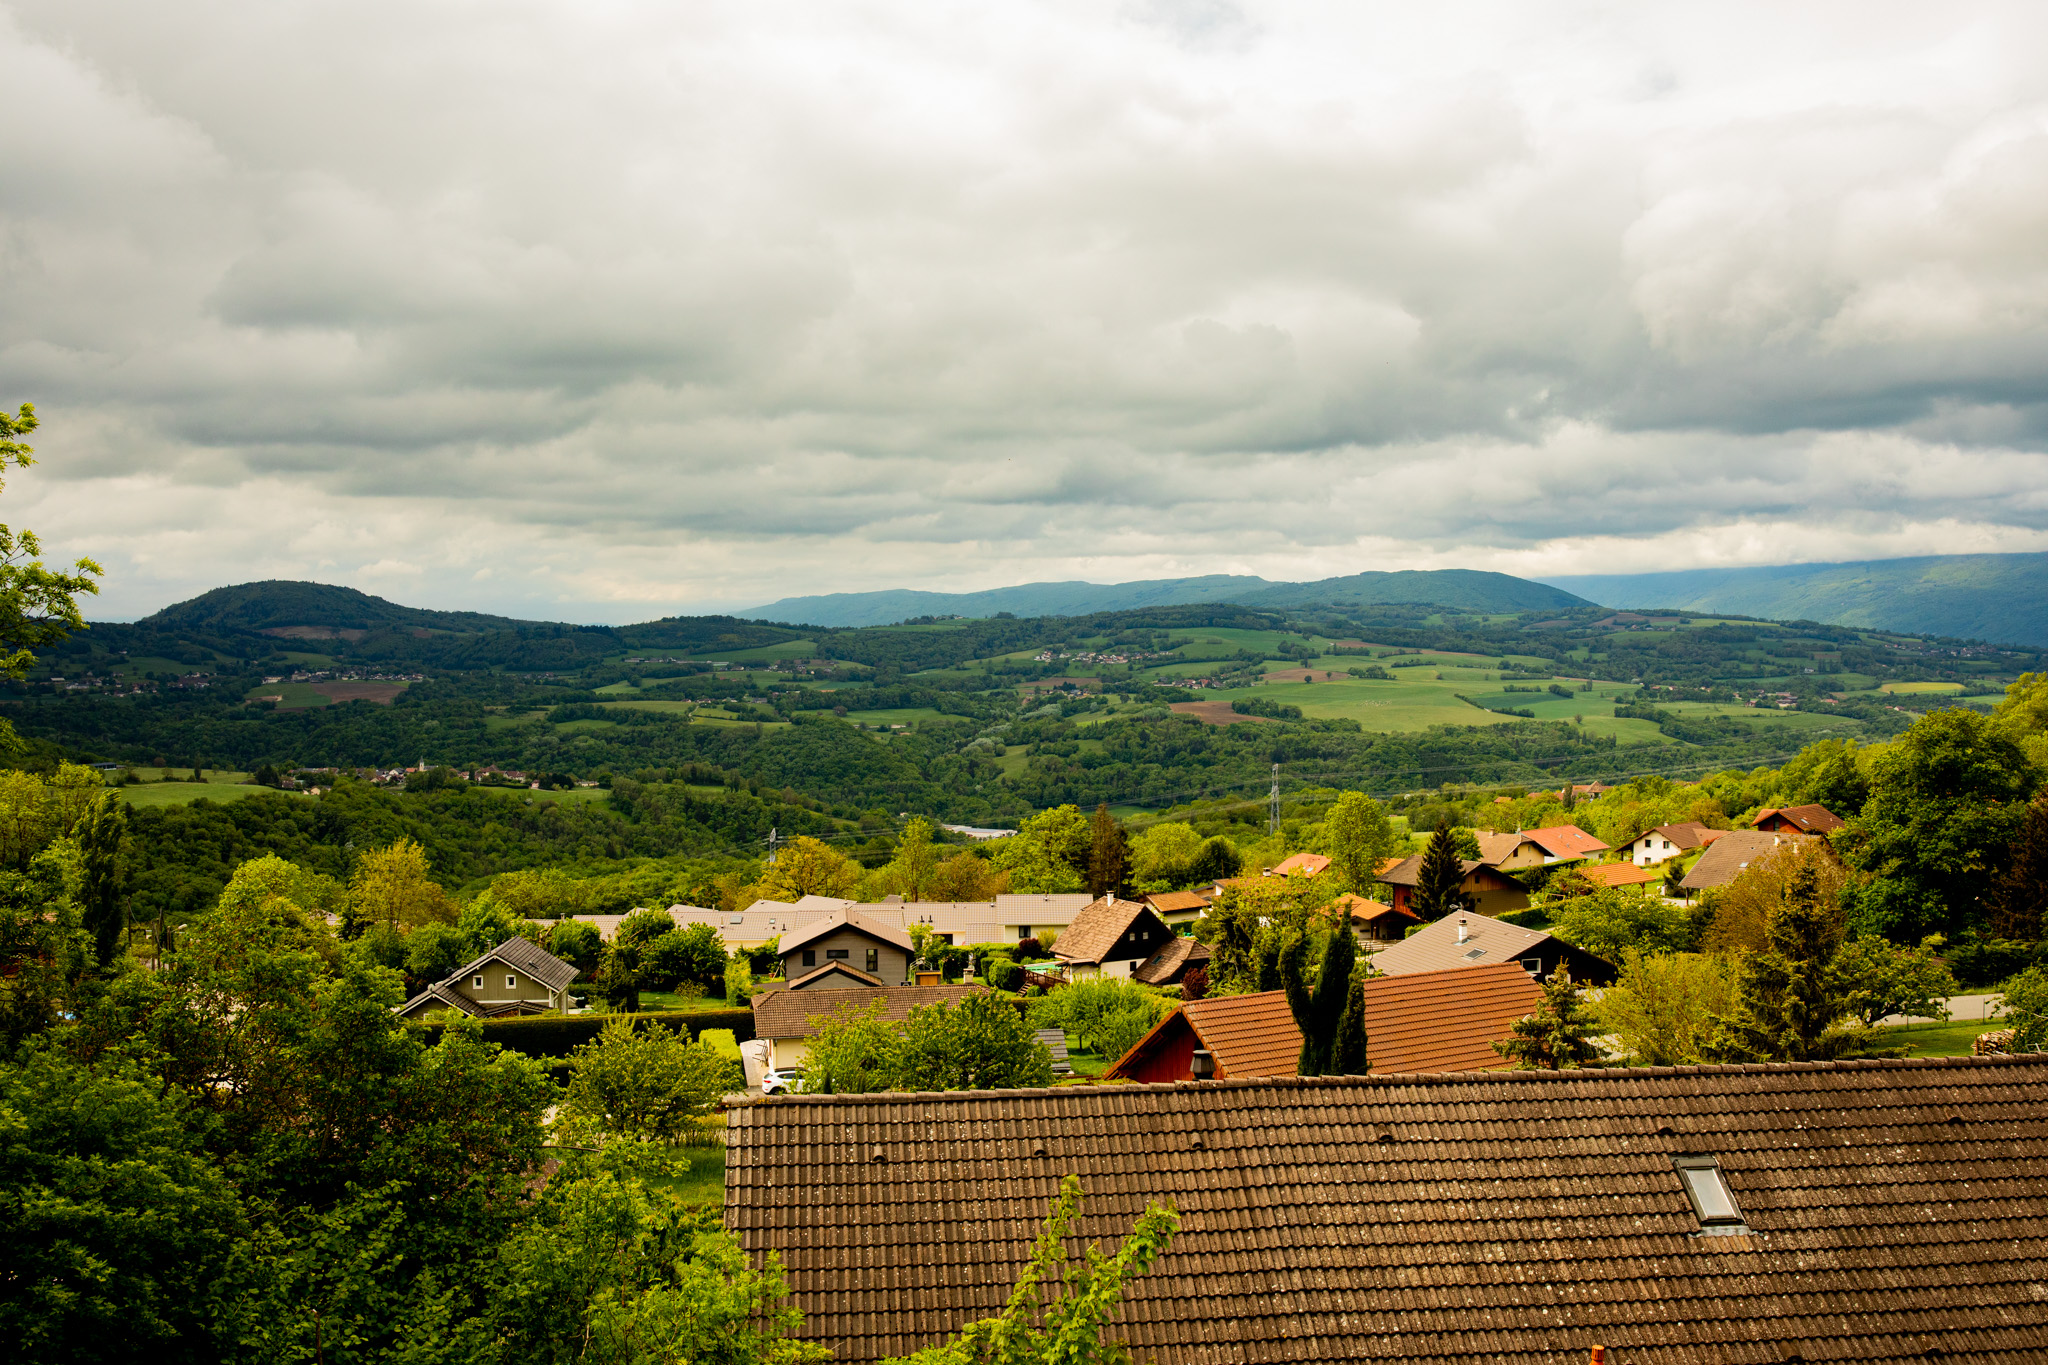 General 2048x1365 photography outdoors nature greenery field village trees forest mountains hills landscape clouds France